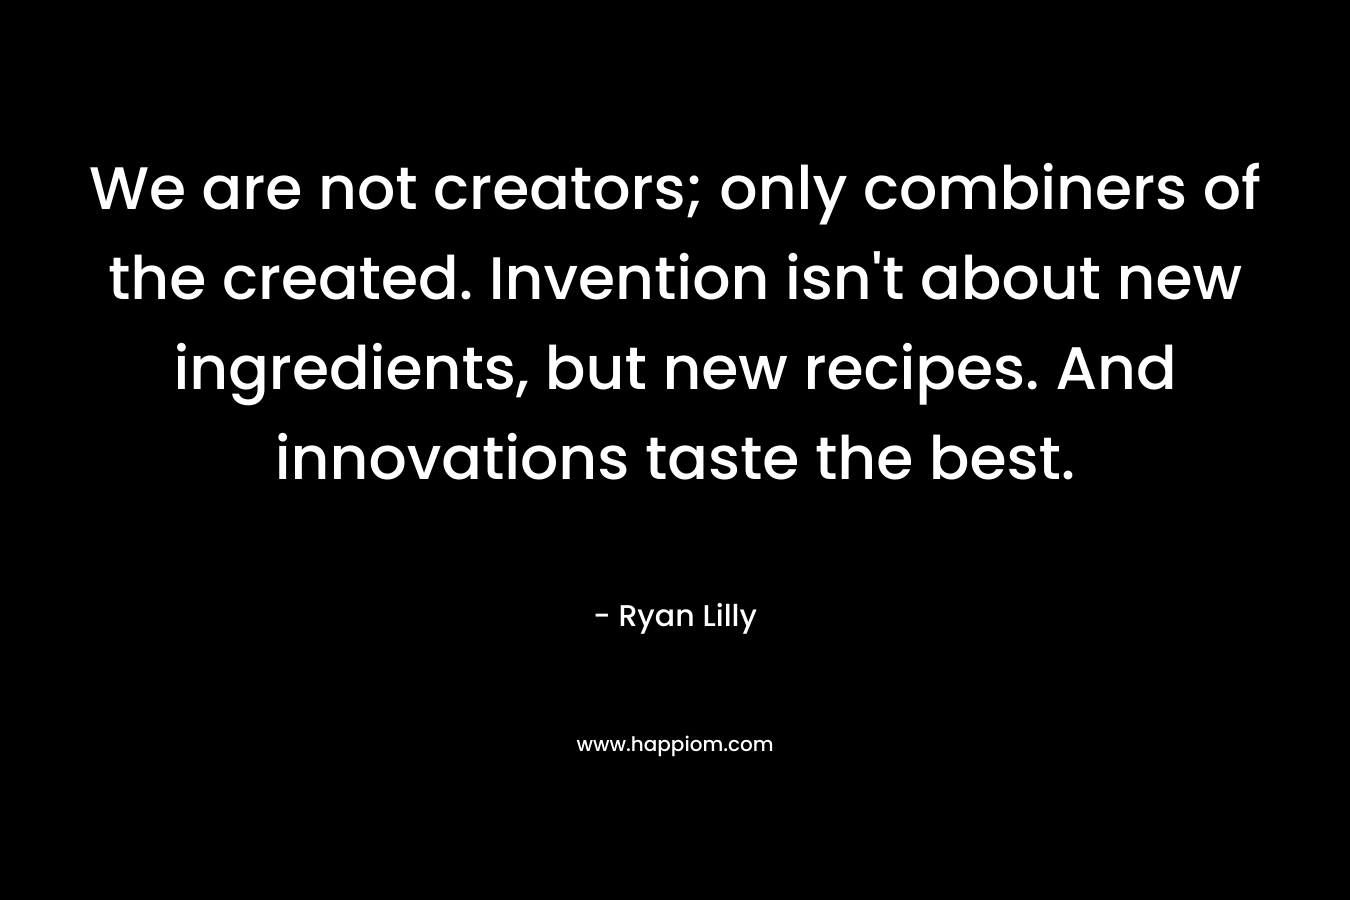 We are not creators; only combiners of the created. Invention isn’t about new ingredients, but new recipes. And innovations taste the best. – Ryan Lilly